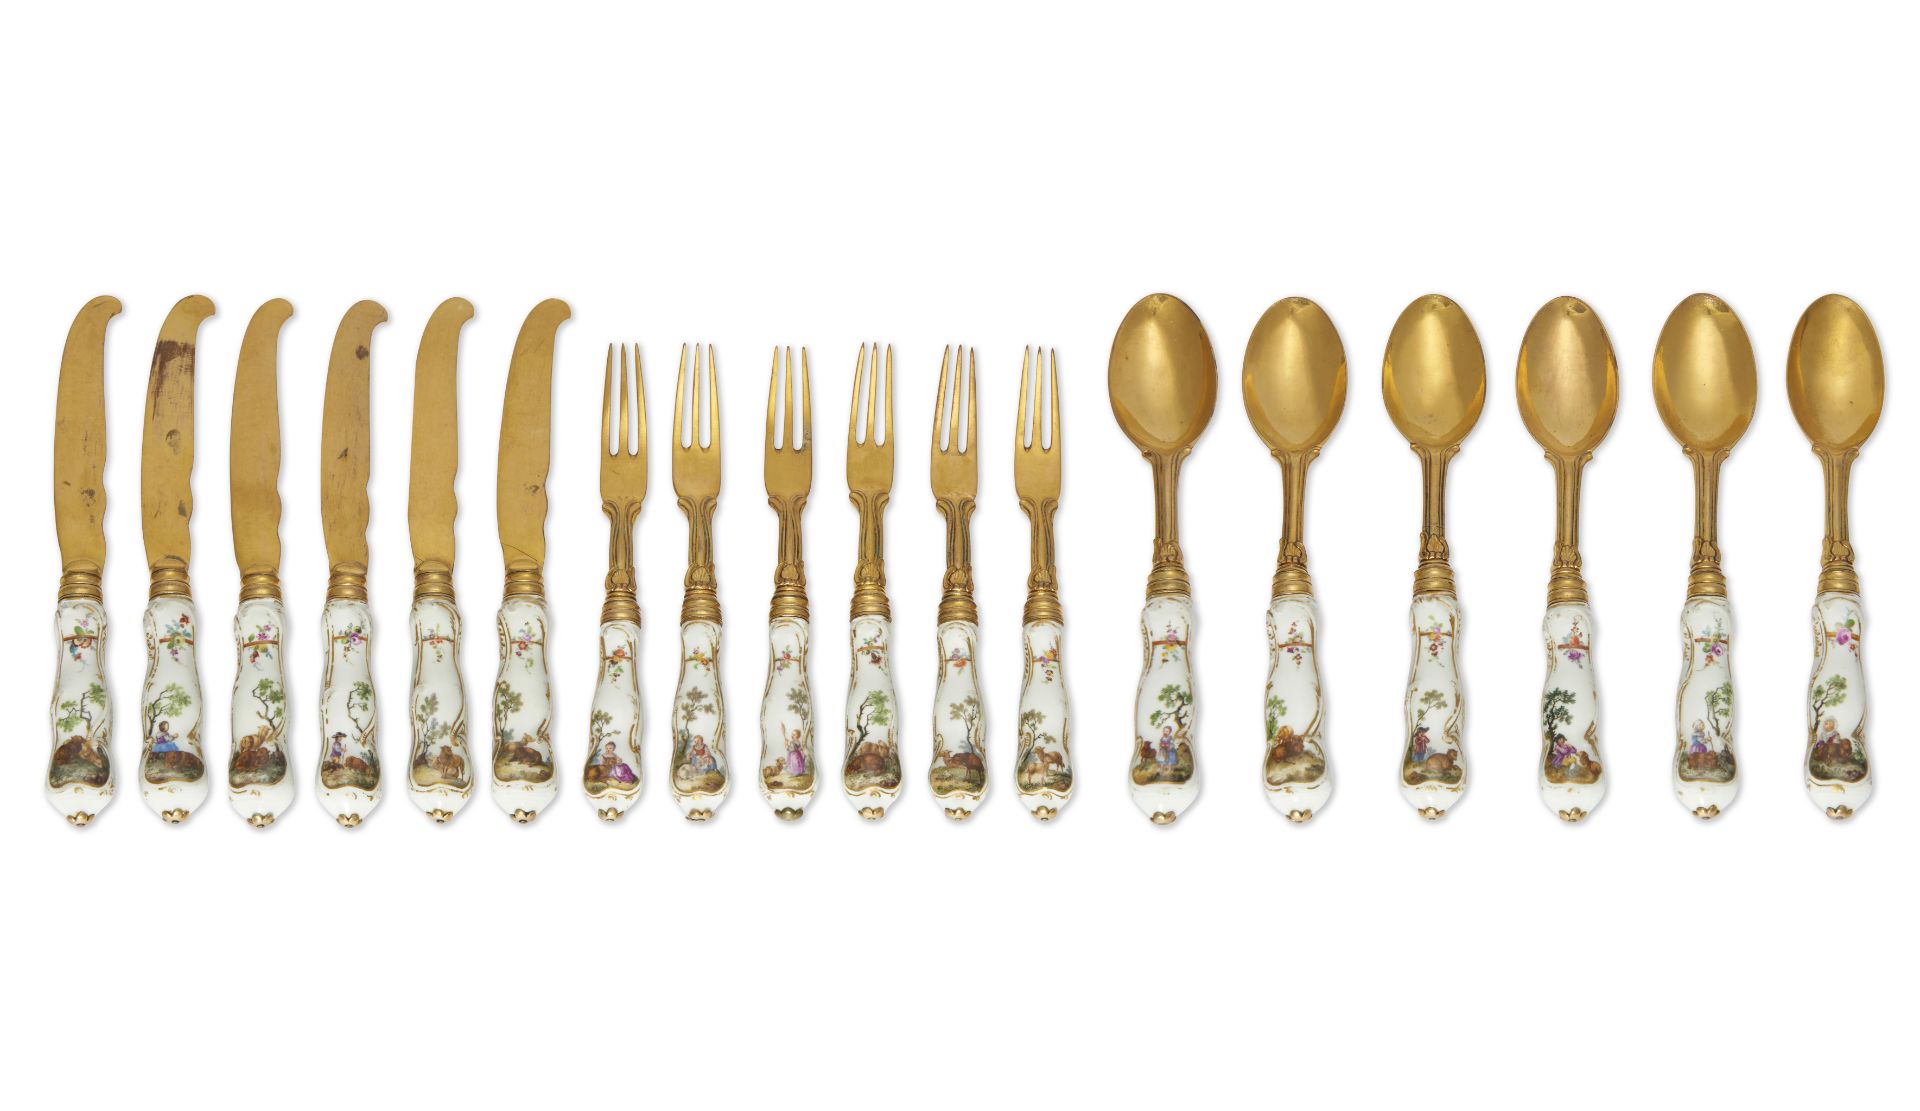 A set of Berlin (K.P.M.) porcelain silver-gilt mounted cutlery handles, c.1770, painted with shep...